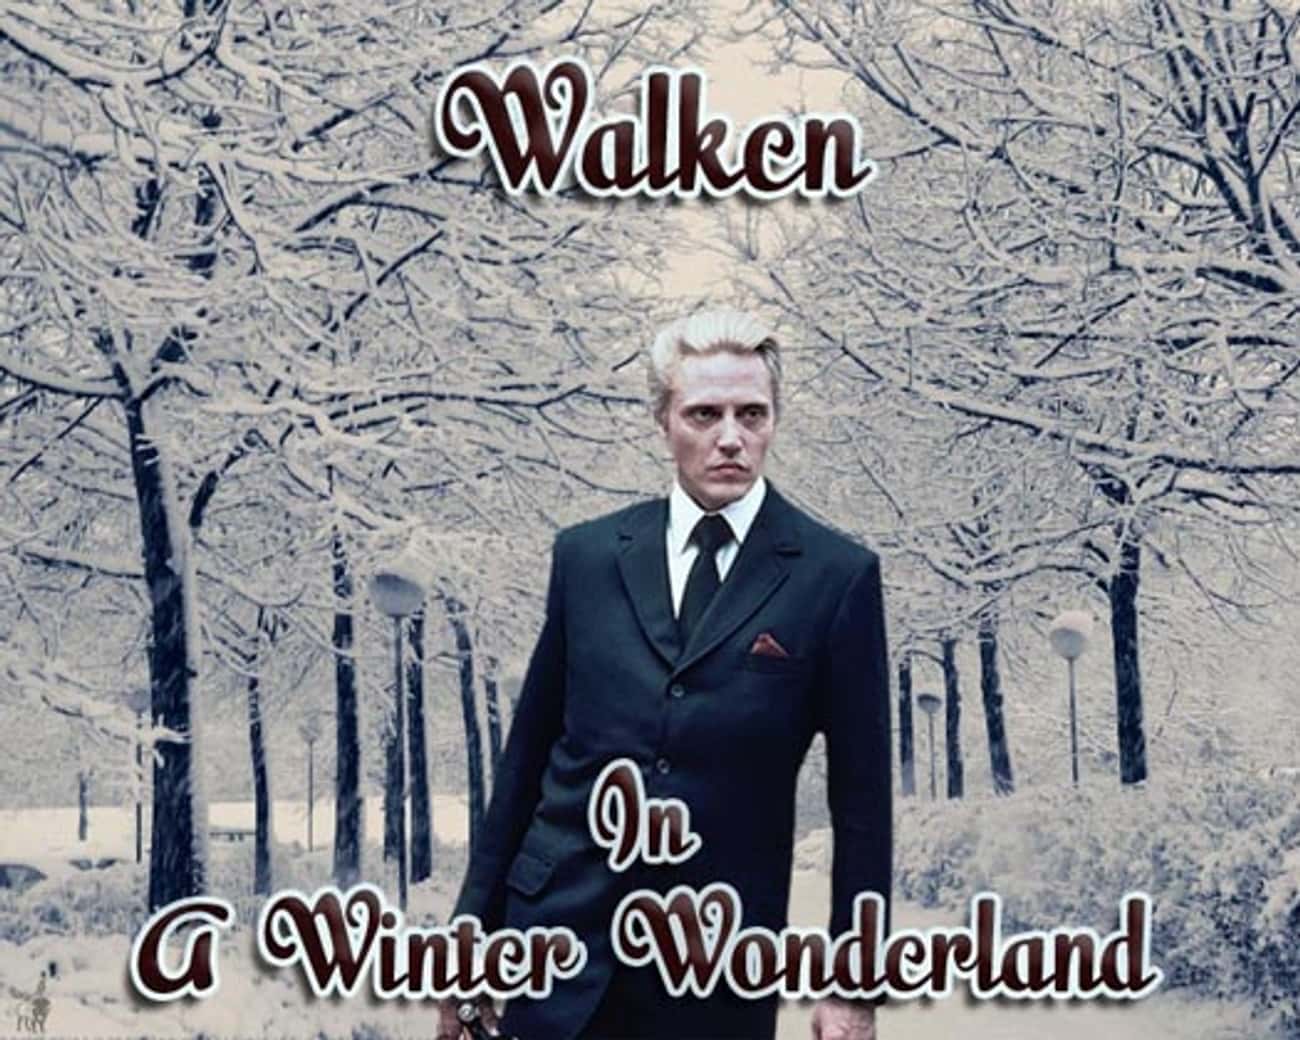 If Christopher Walken Ever Made a Christmas Album What Would He Call It?